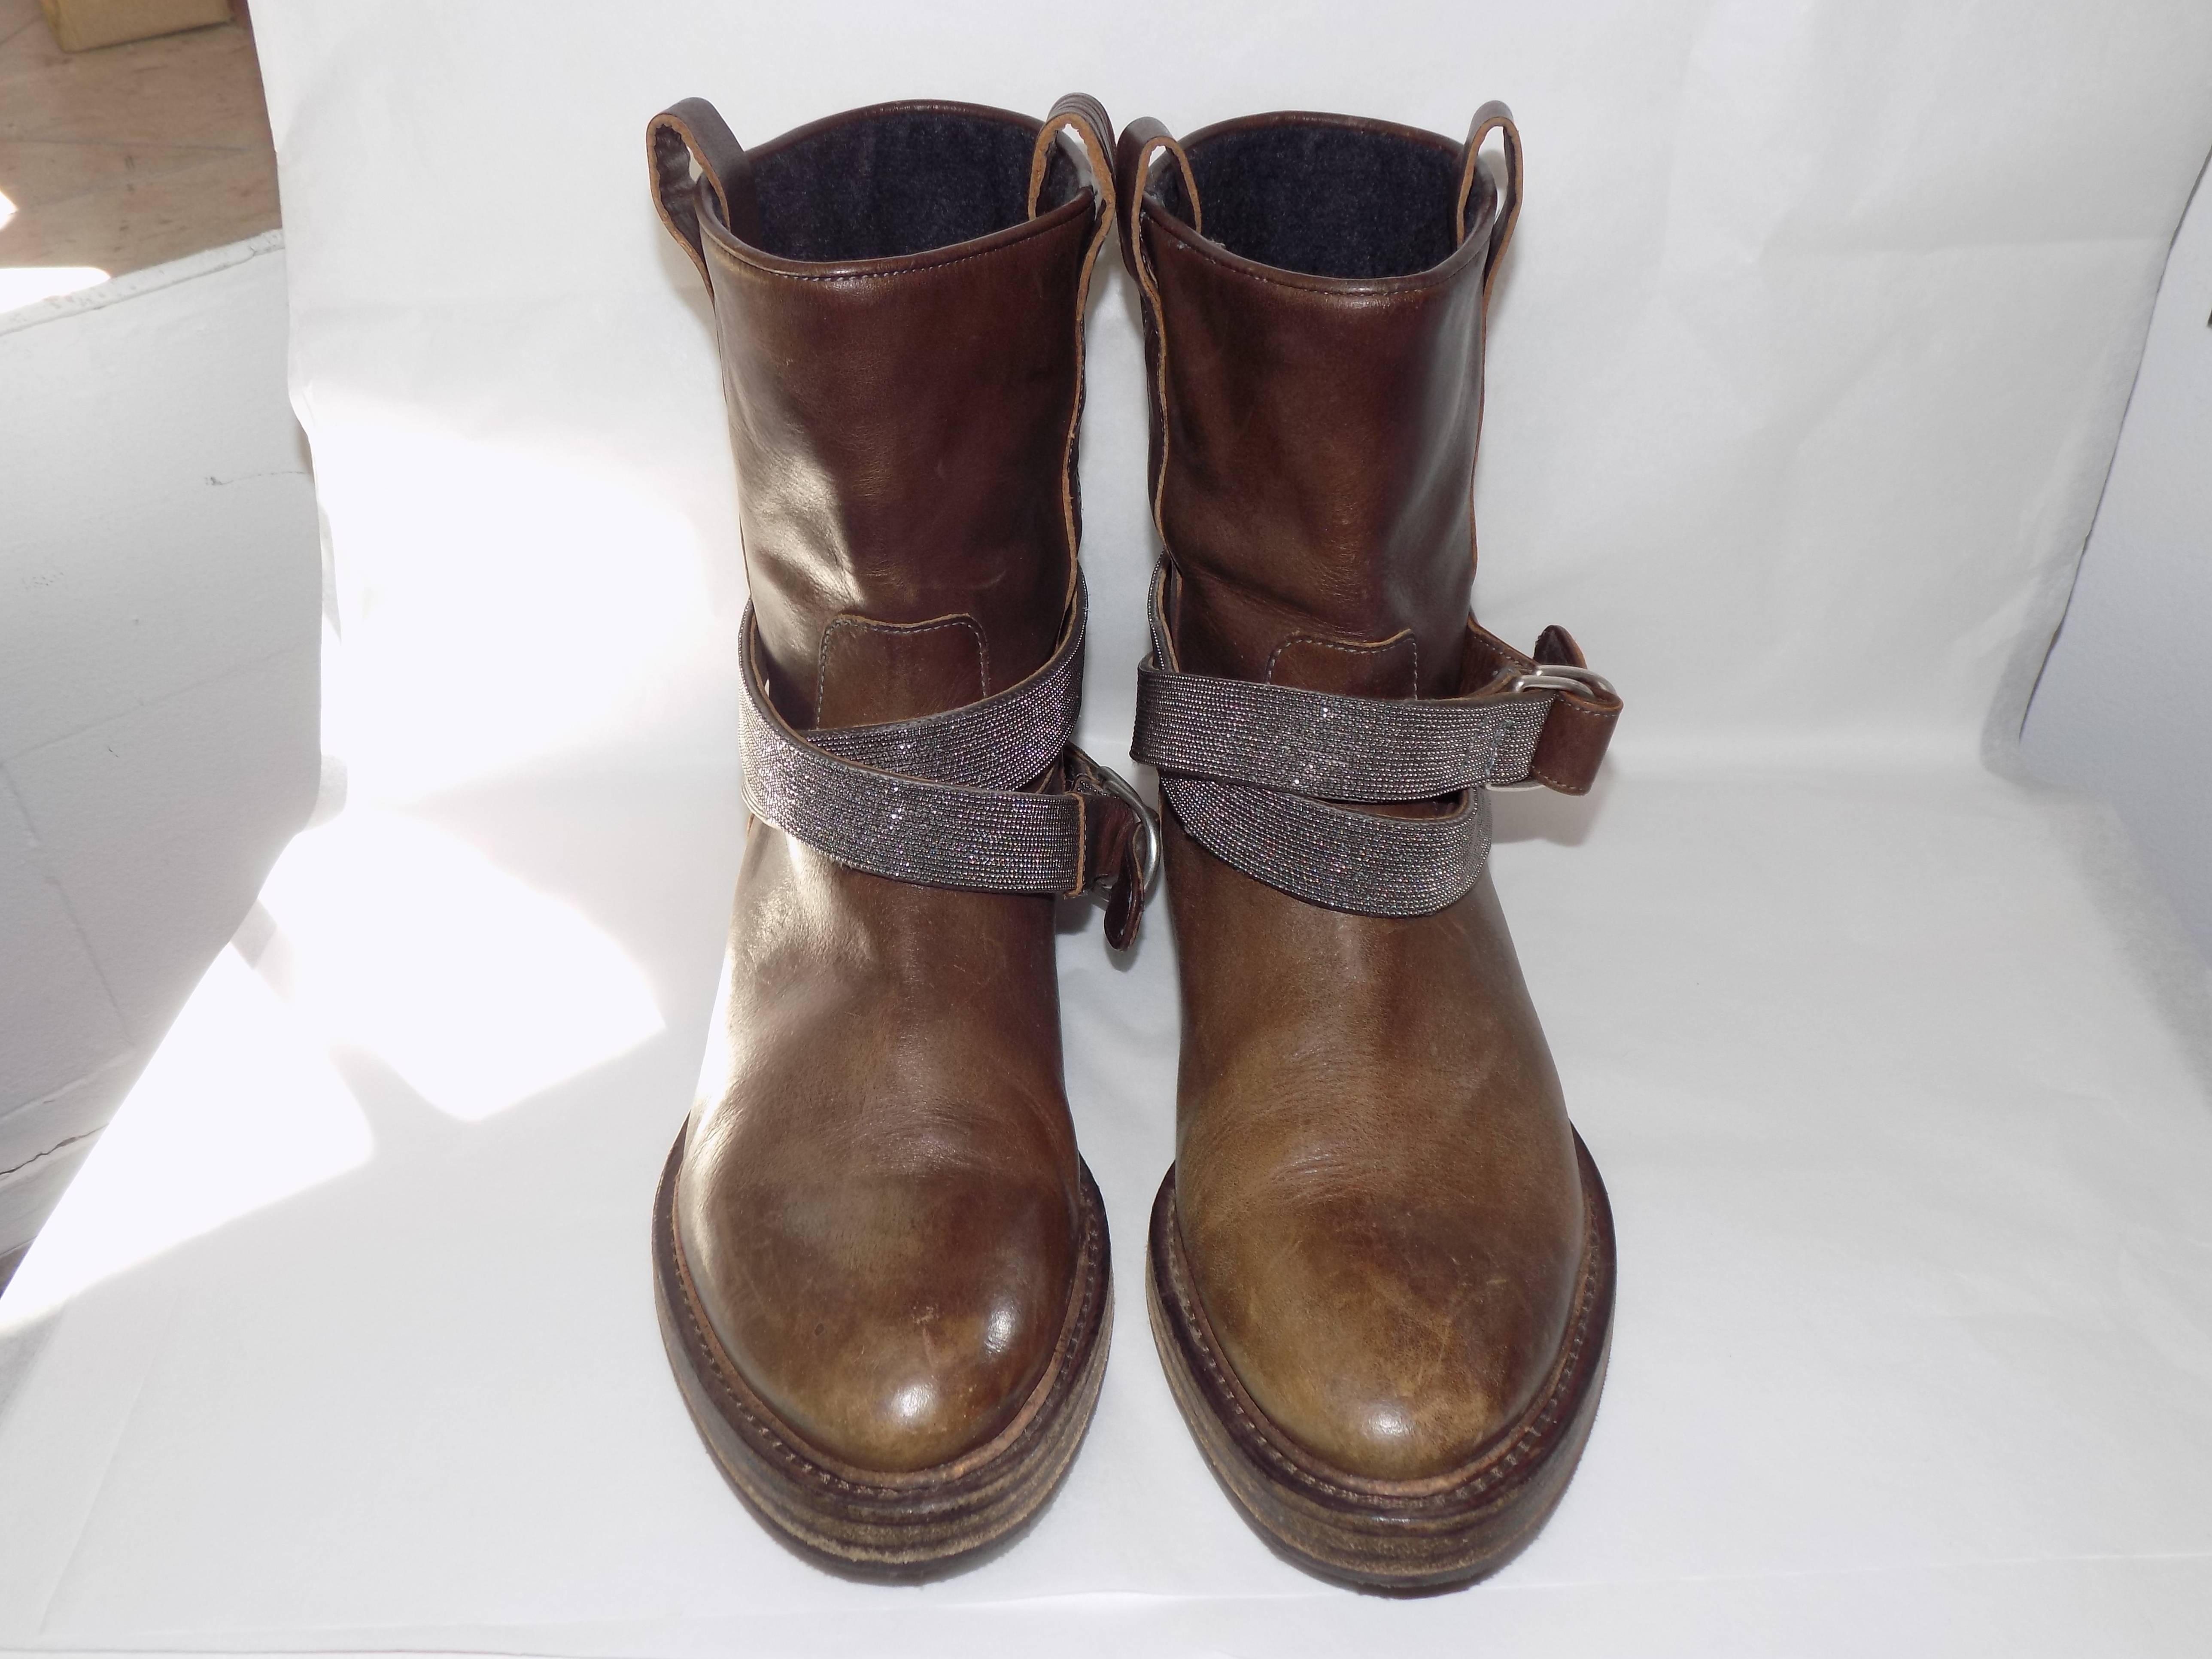 Brown Brunello Cucinelli Leather Boots with Monili Strap Sold out Ret $1945